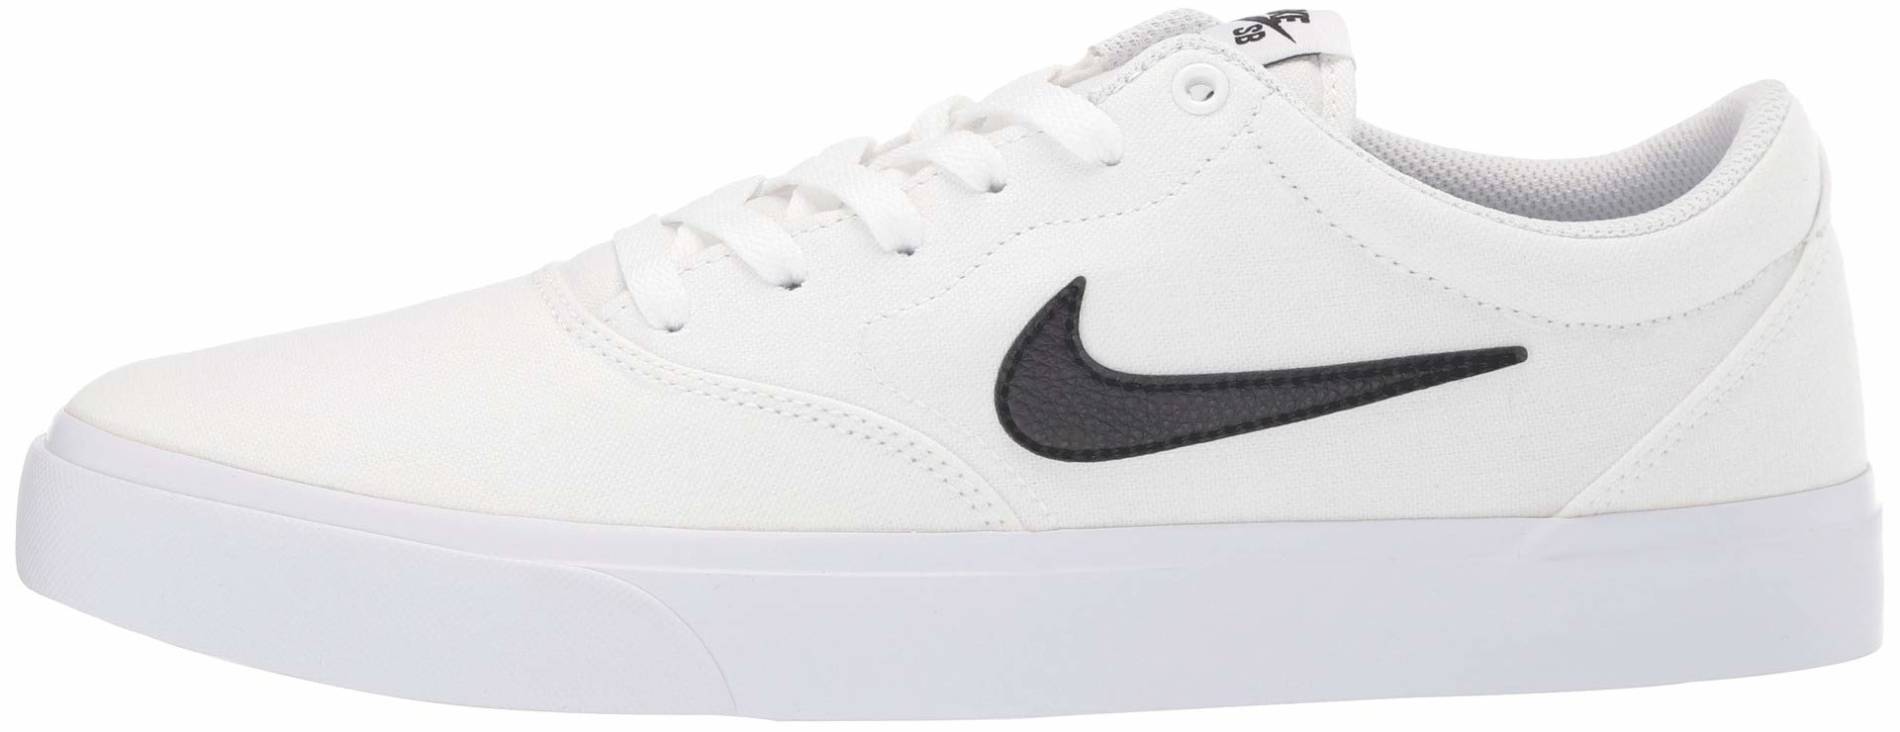 Nike SB Charge Canvas sneakers in 6 